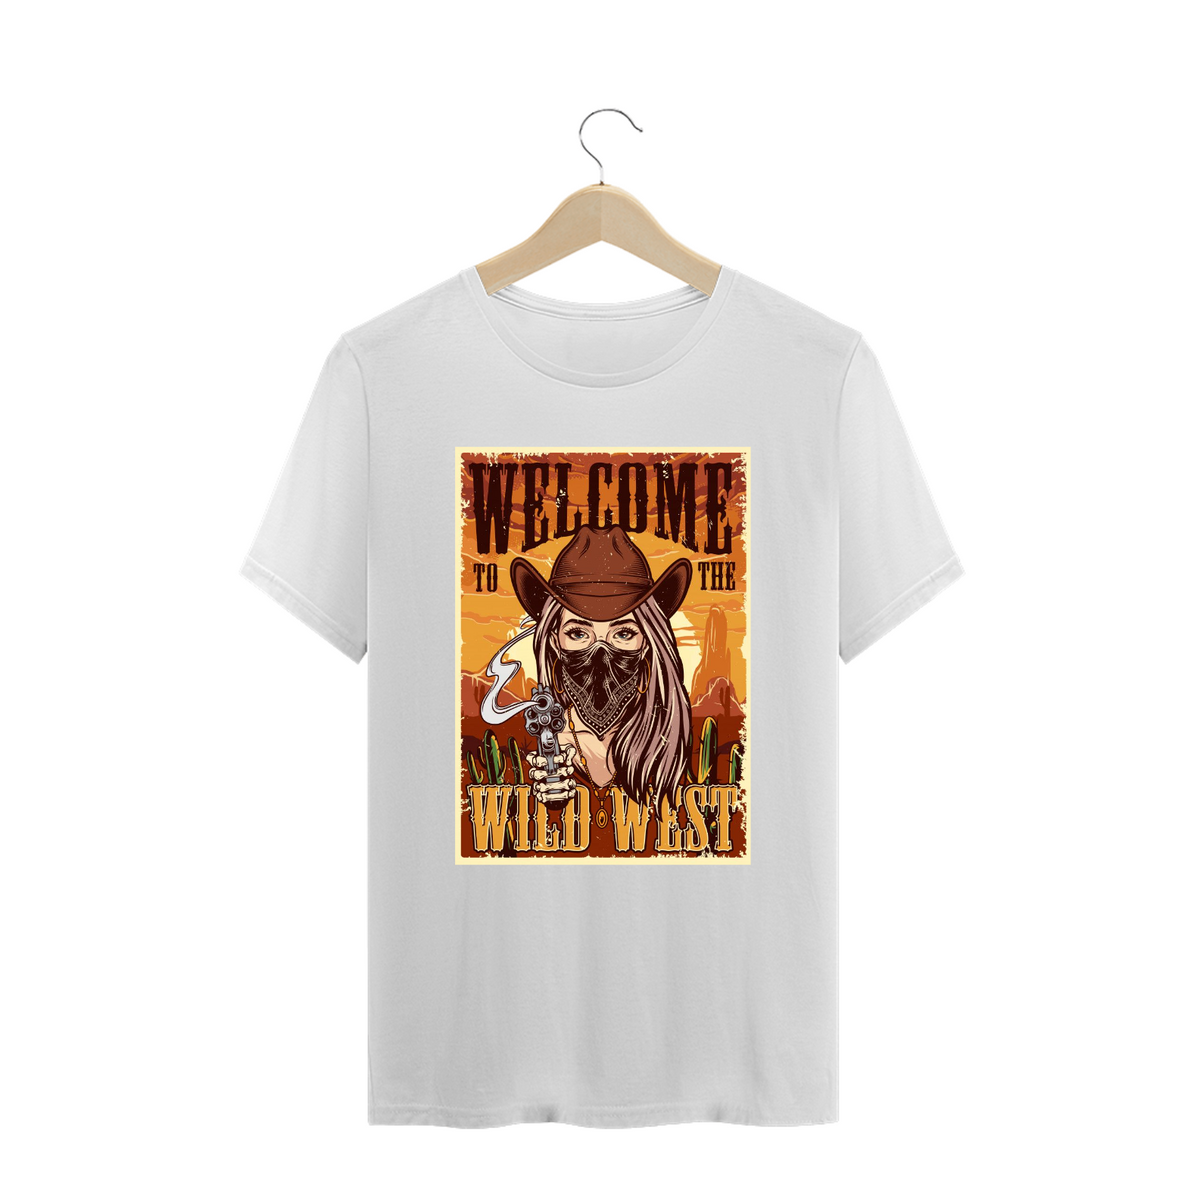 Nome do produto: T-Shirt Plus Size - Welcome to The Wild West